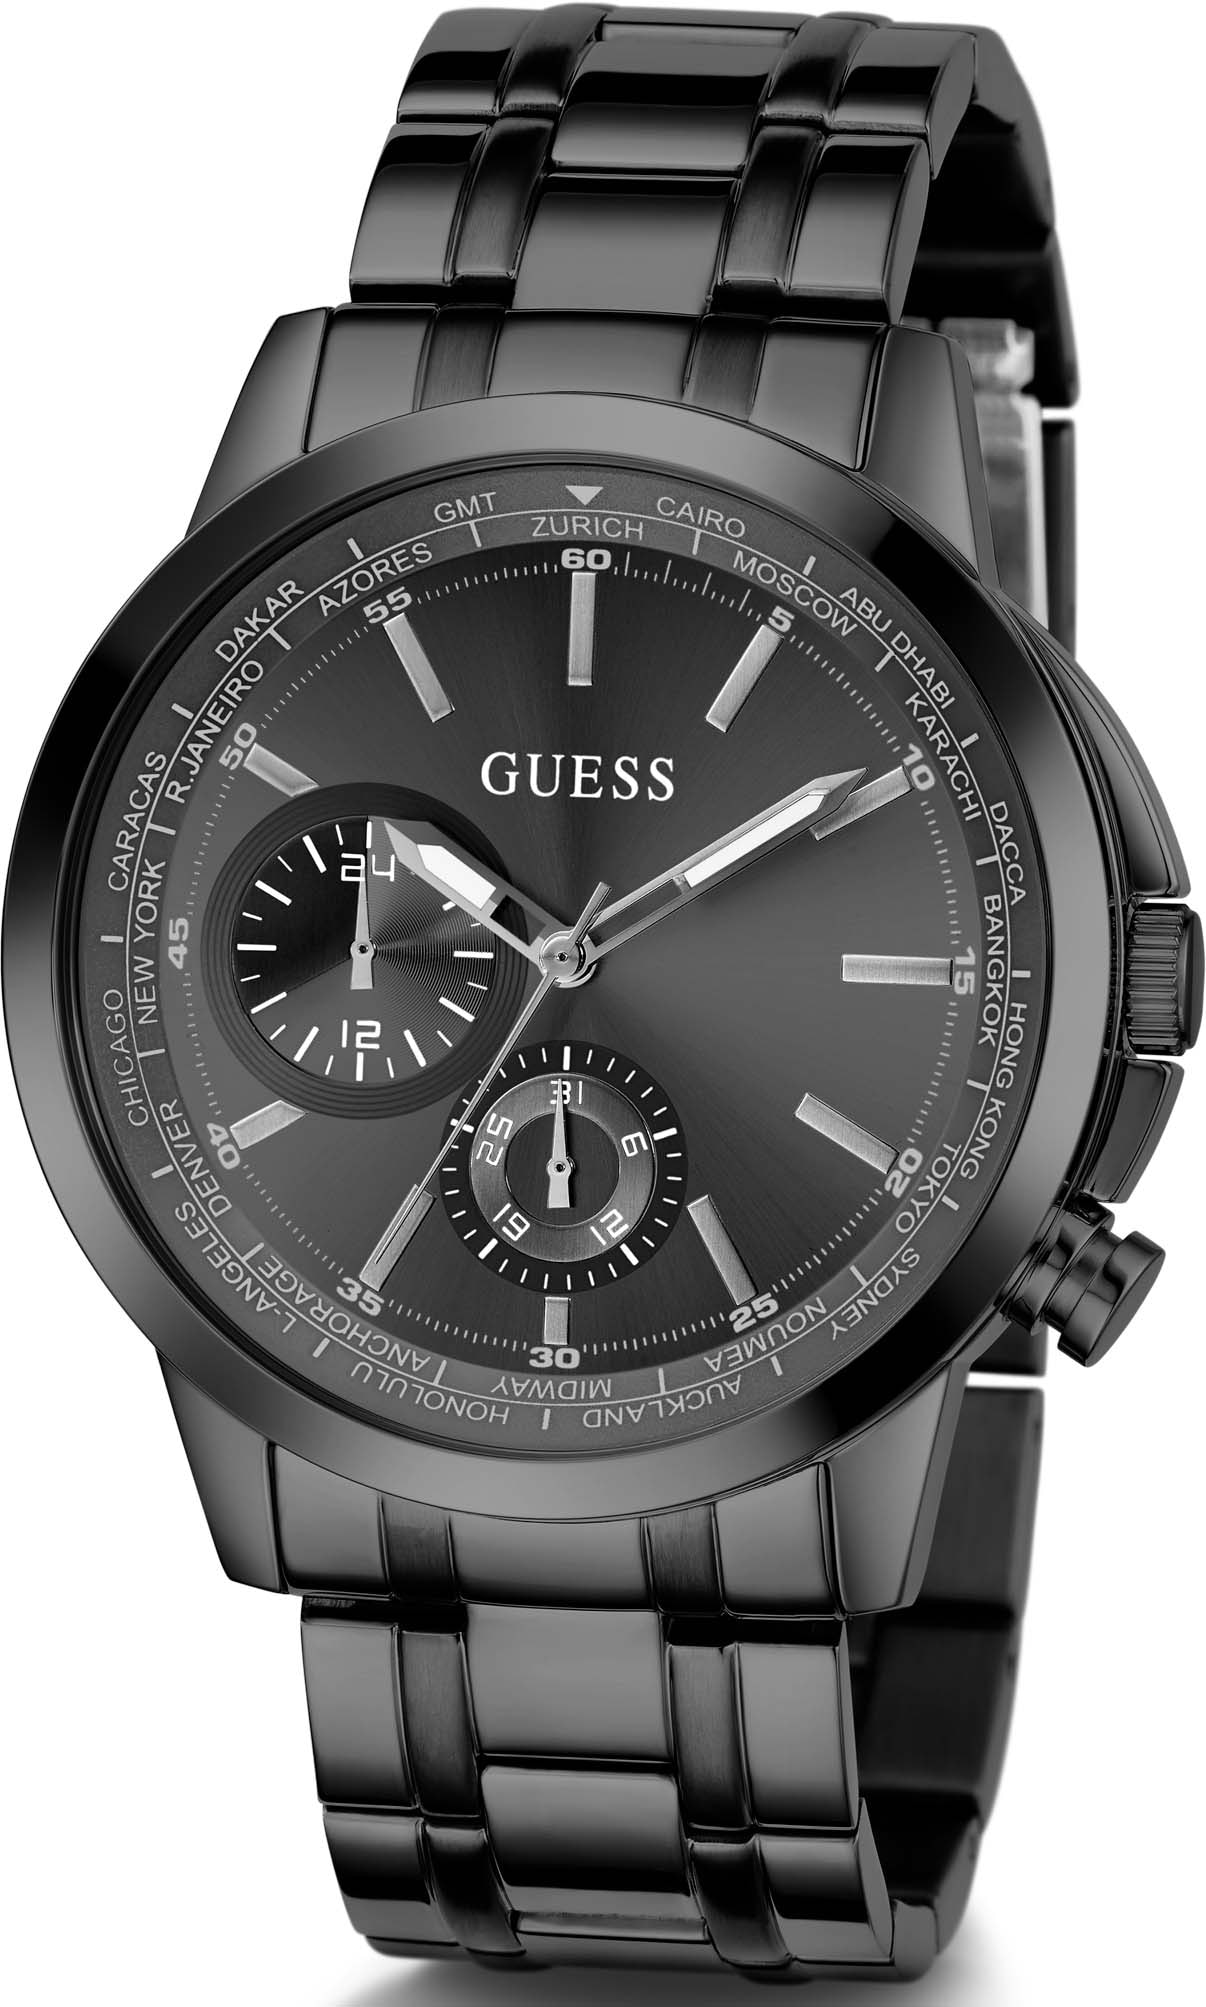 Guess Multifunktionsuhr »GW0490G3« bei ♕